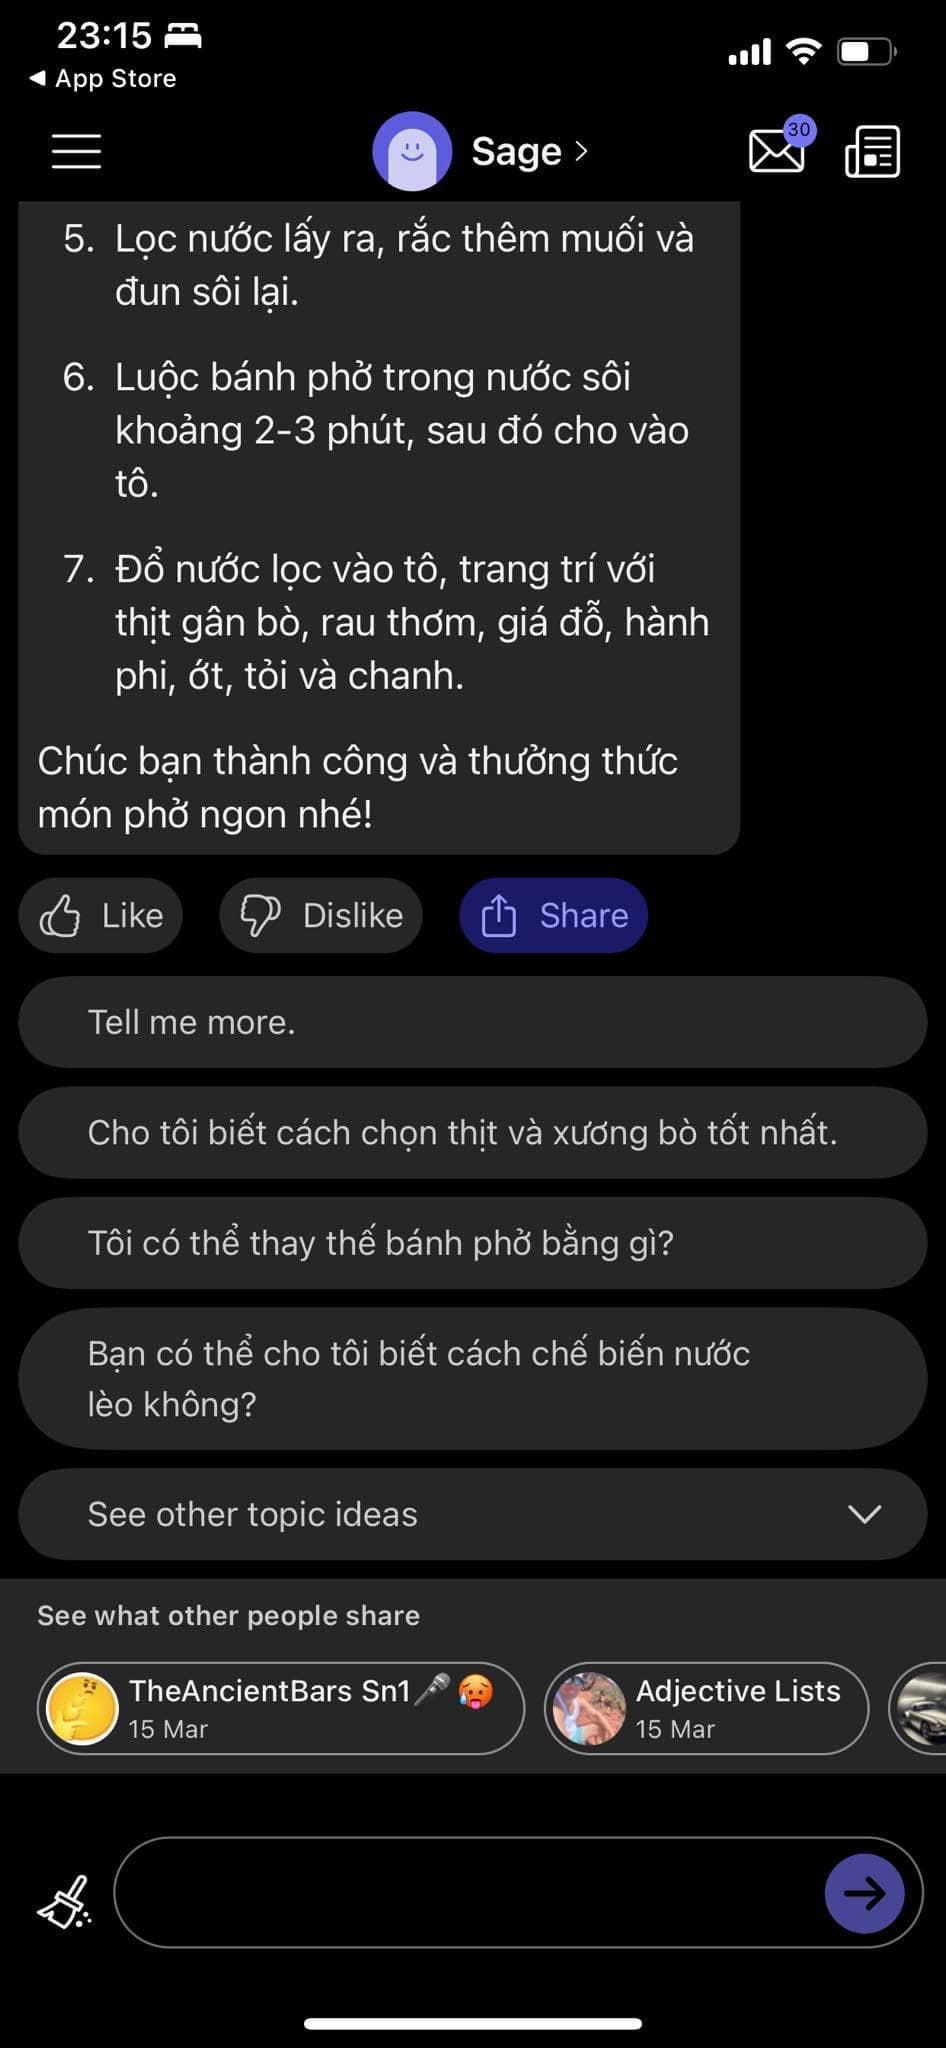 Instructions for using Poe AI Fast Chat on mobile phones